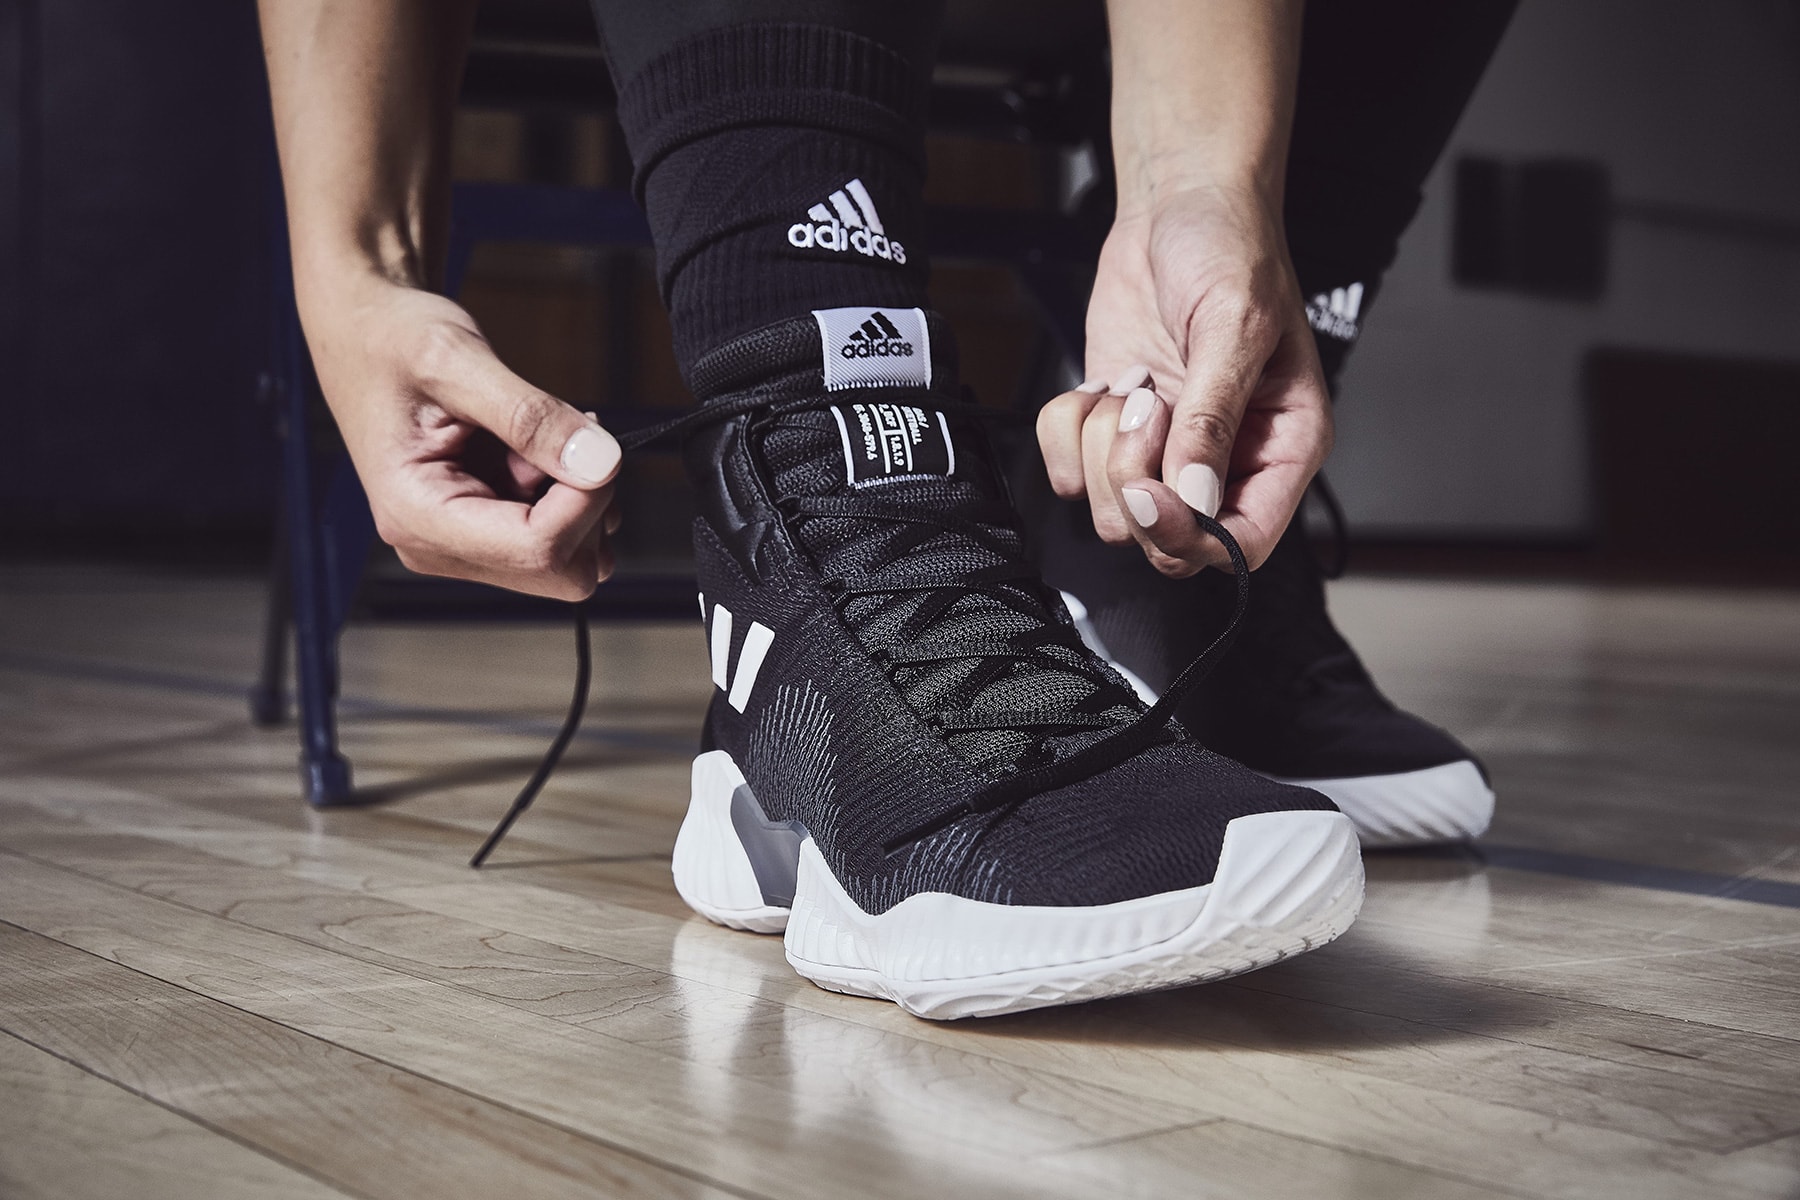 adidas basketball pro bounce mad bounce footwear october 2018 Donovan Mitchell Zach LaVine Kristaps Porzingis Chiney Ogwumike Candace Parker Kyle Lowry Nick Young Jaylen Brown Kelly Oubre Jr.